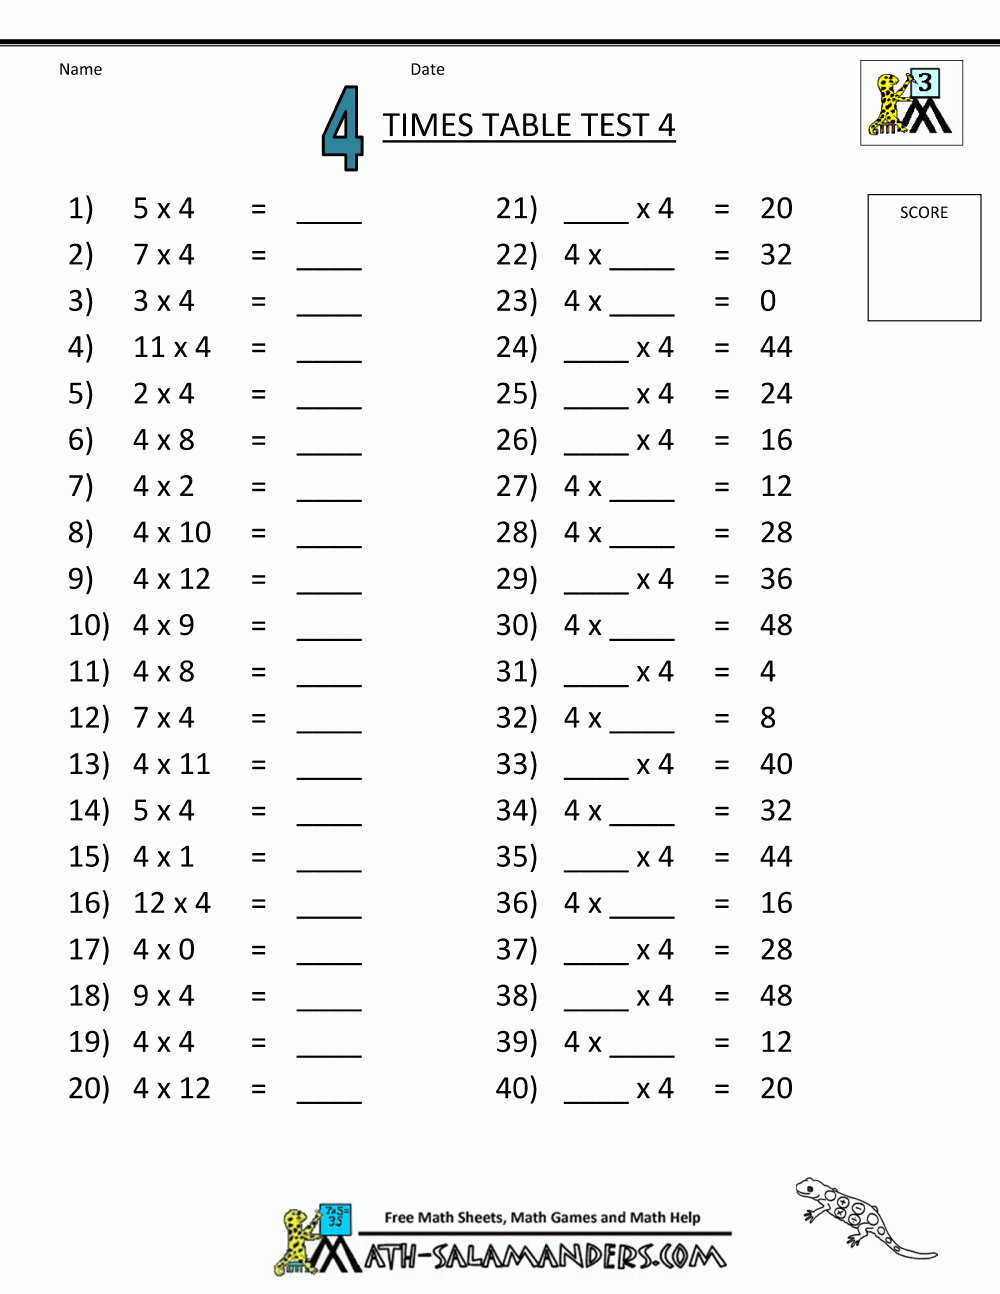 Times Table Tests - 2 3 4 5 10 Times Tables | Math Practice